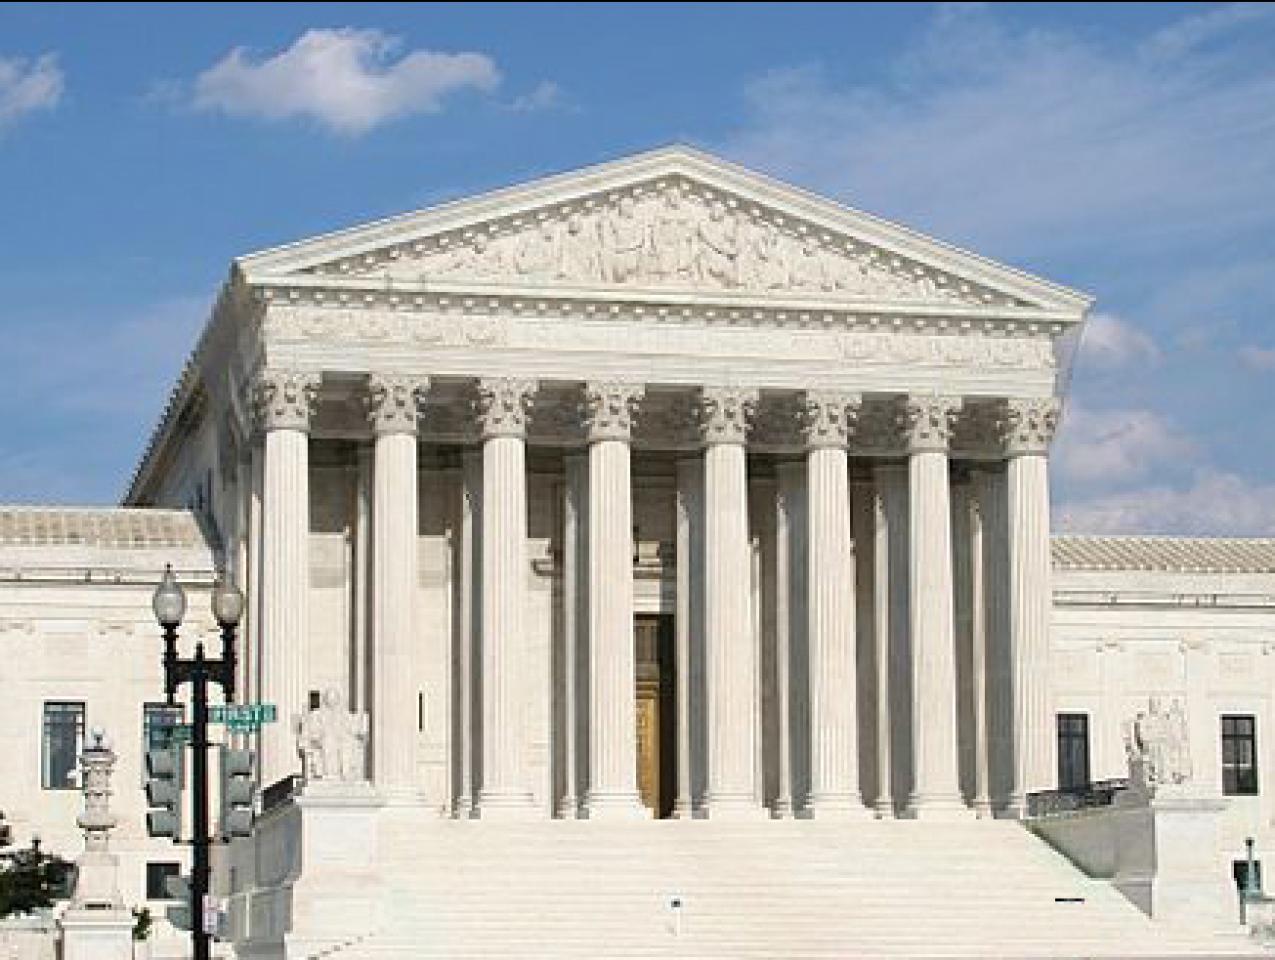 The Supreme Court of the United States